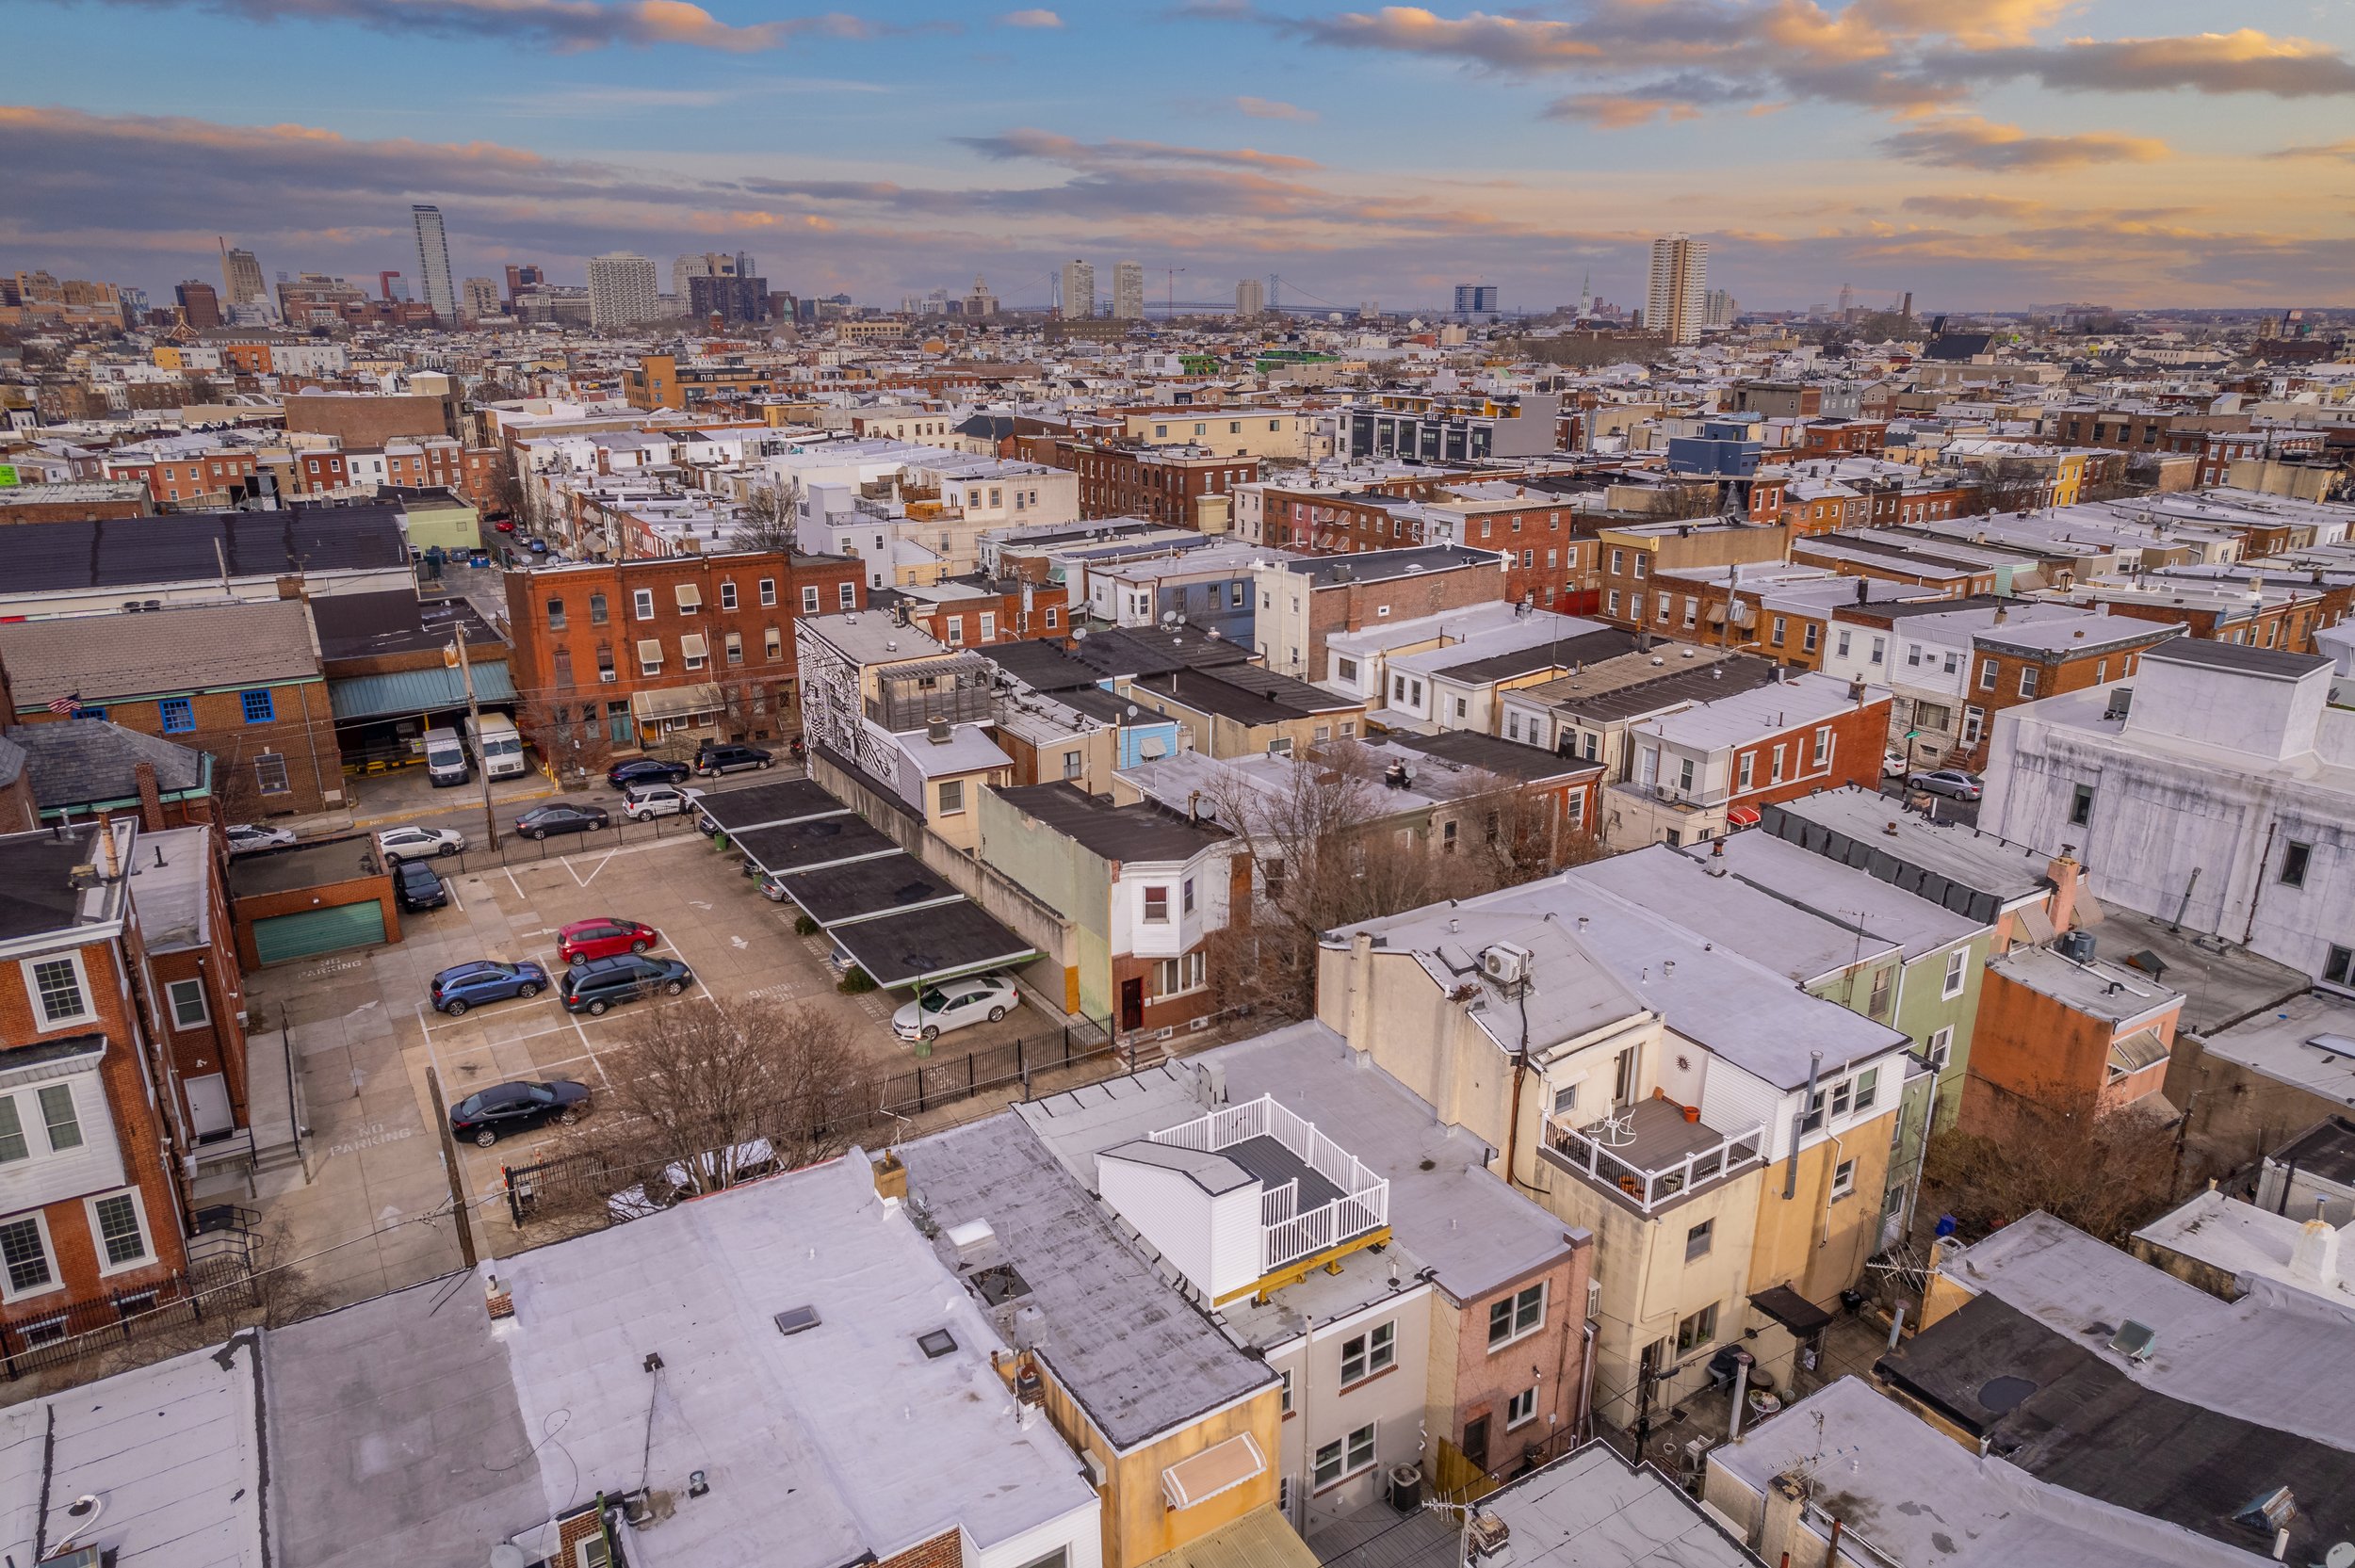 914 GREENWICH ST AERIAL PHOTOGRAPHY Ⓒ WEFILMPHILLY-6.jpg